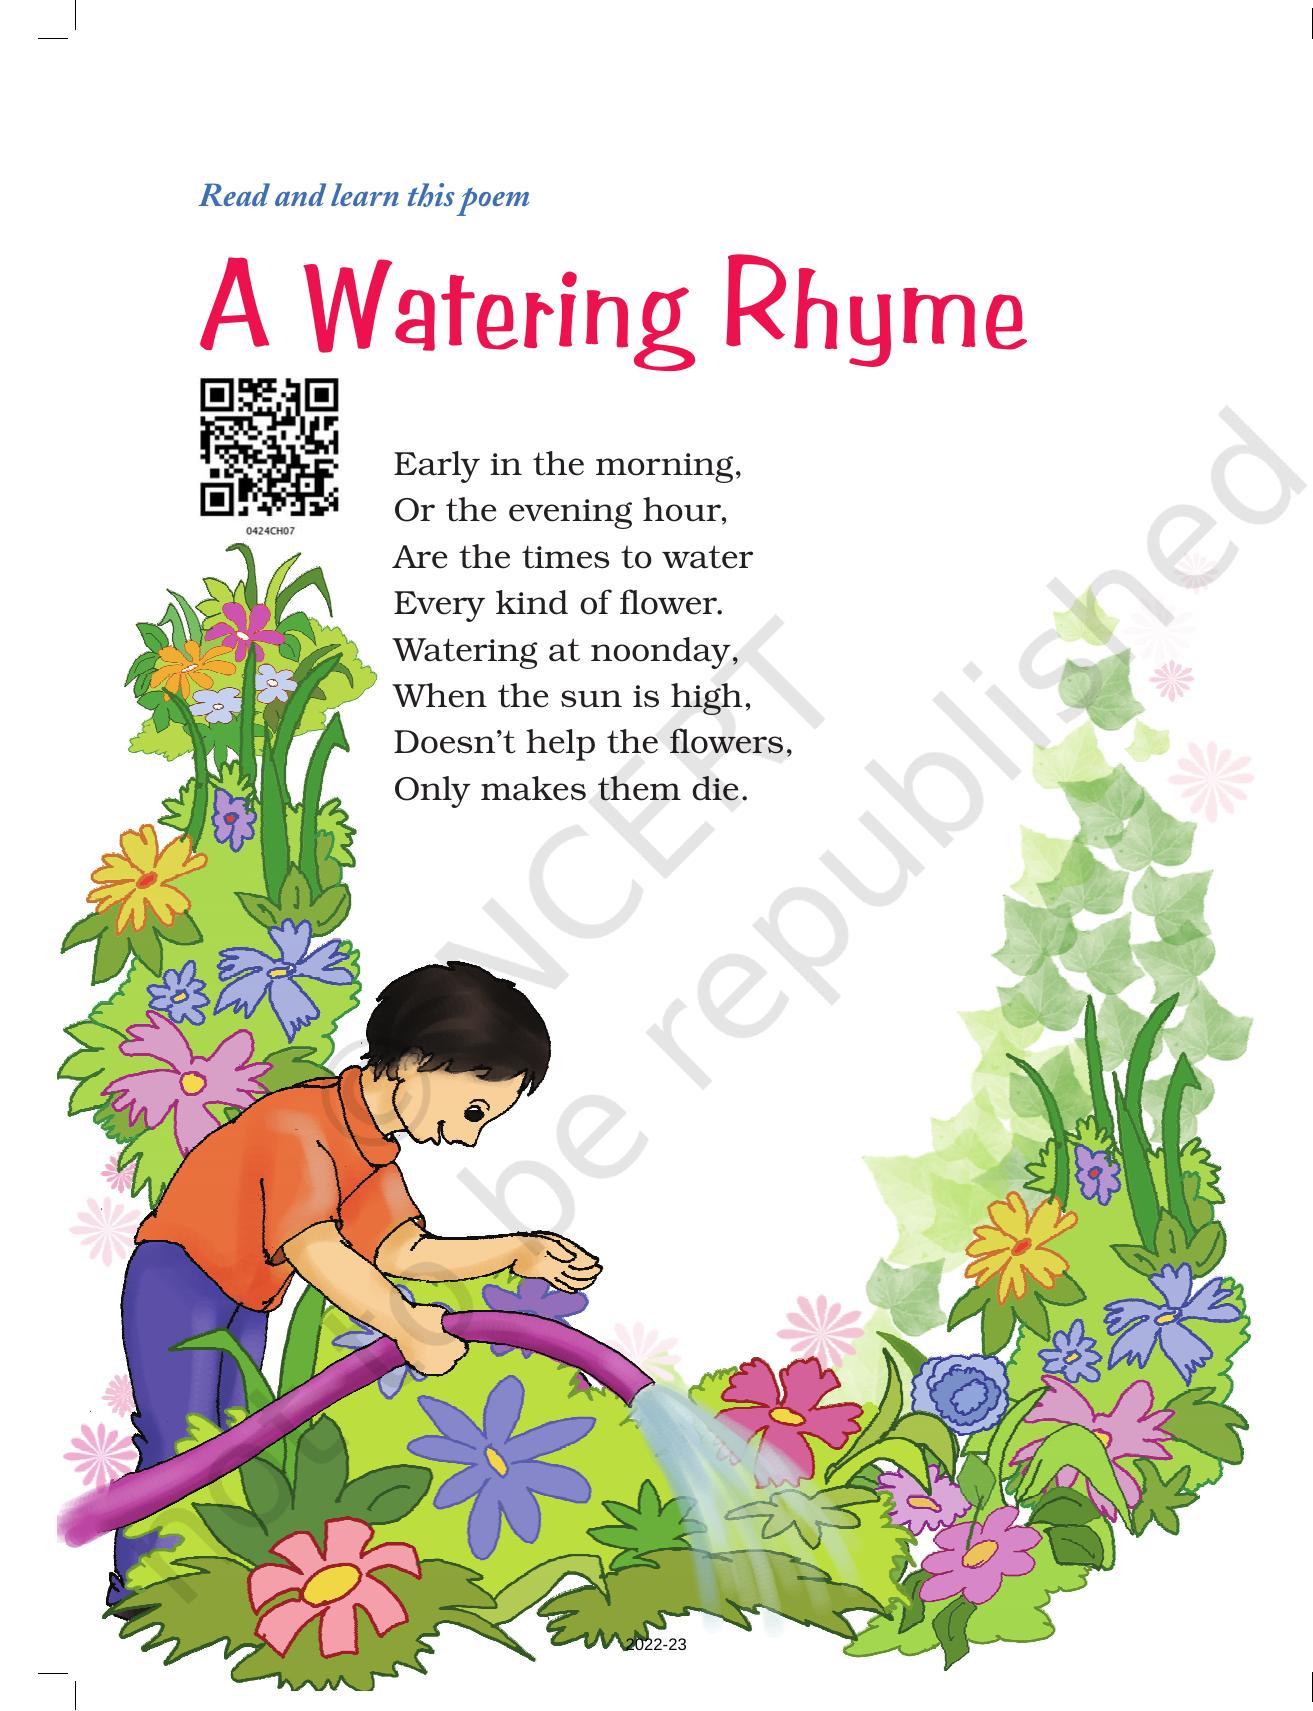 NCERT Book for Class 4 English (Poem): Chapter 13-A Watering Rhyme - Page 2